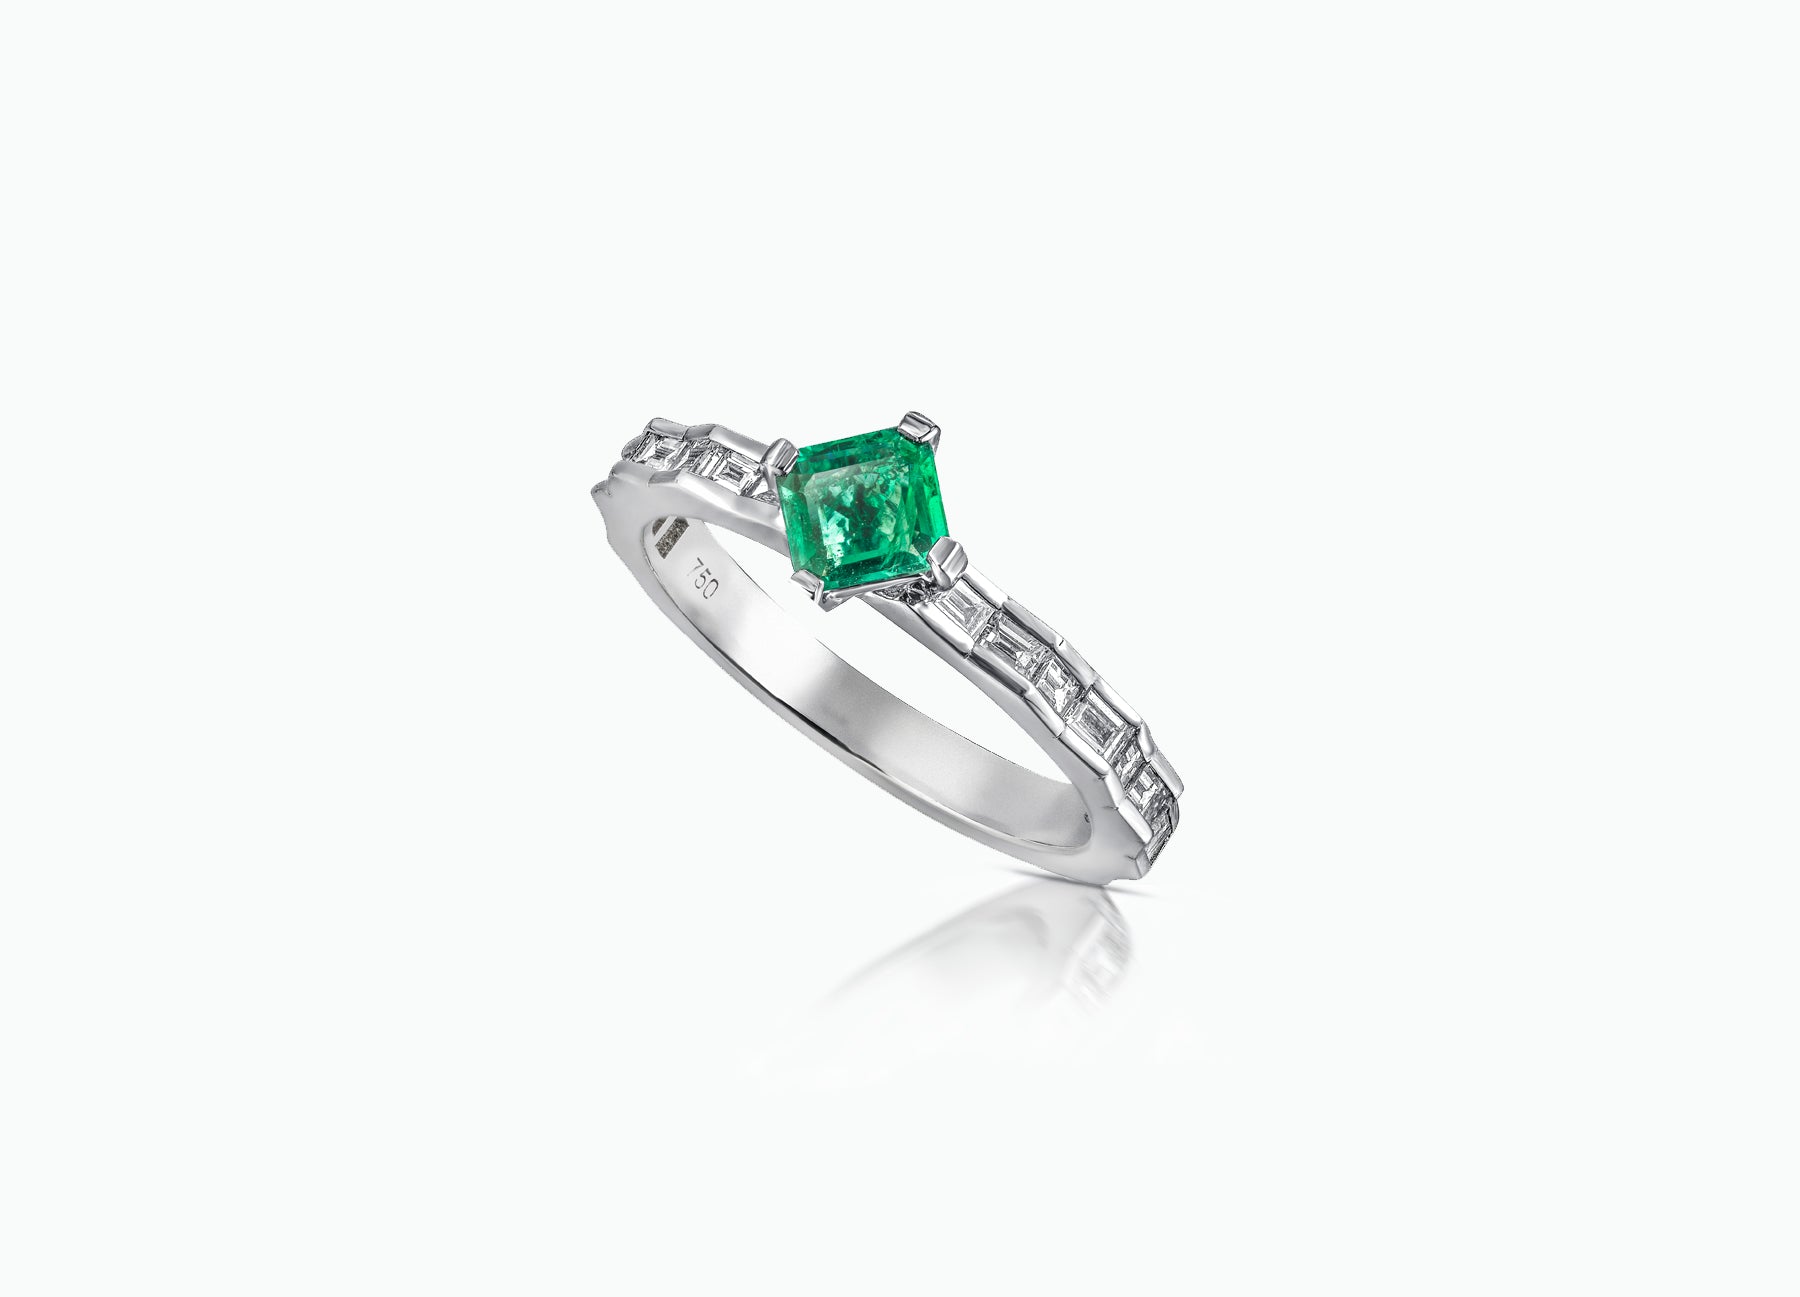 Cosmic Art Ring alternative bridal set by Tomasz Donocik centre ring with diamonds and an emerald